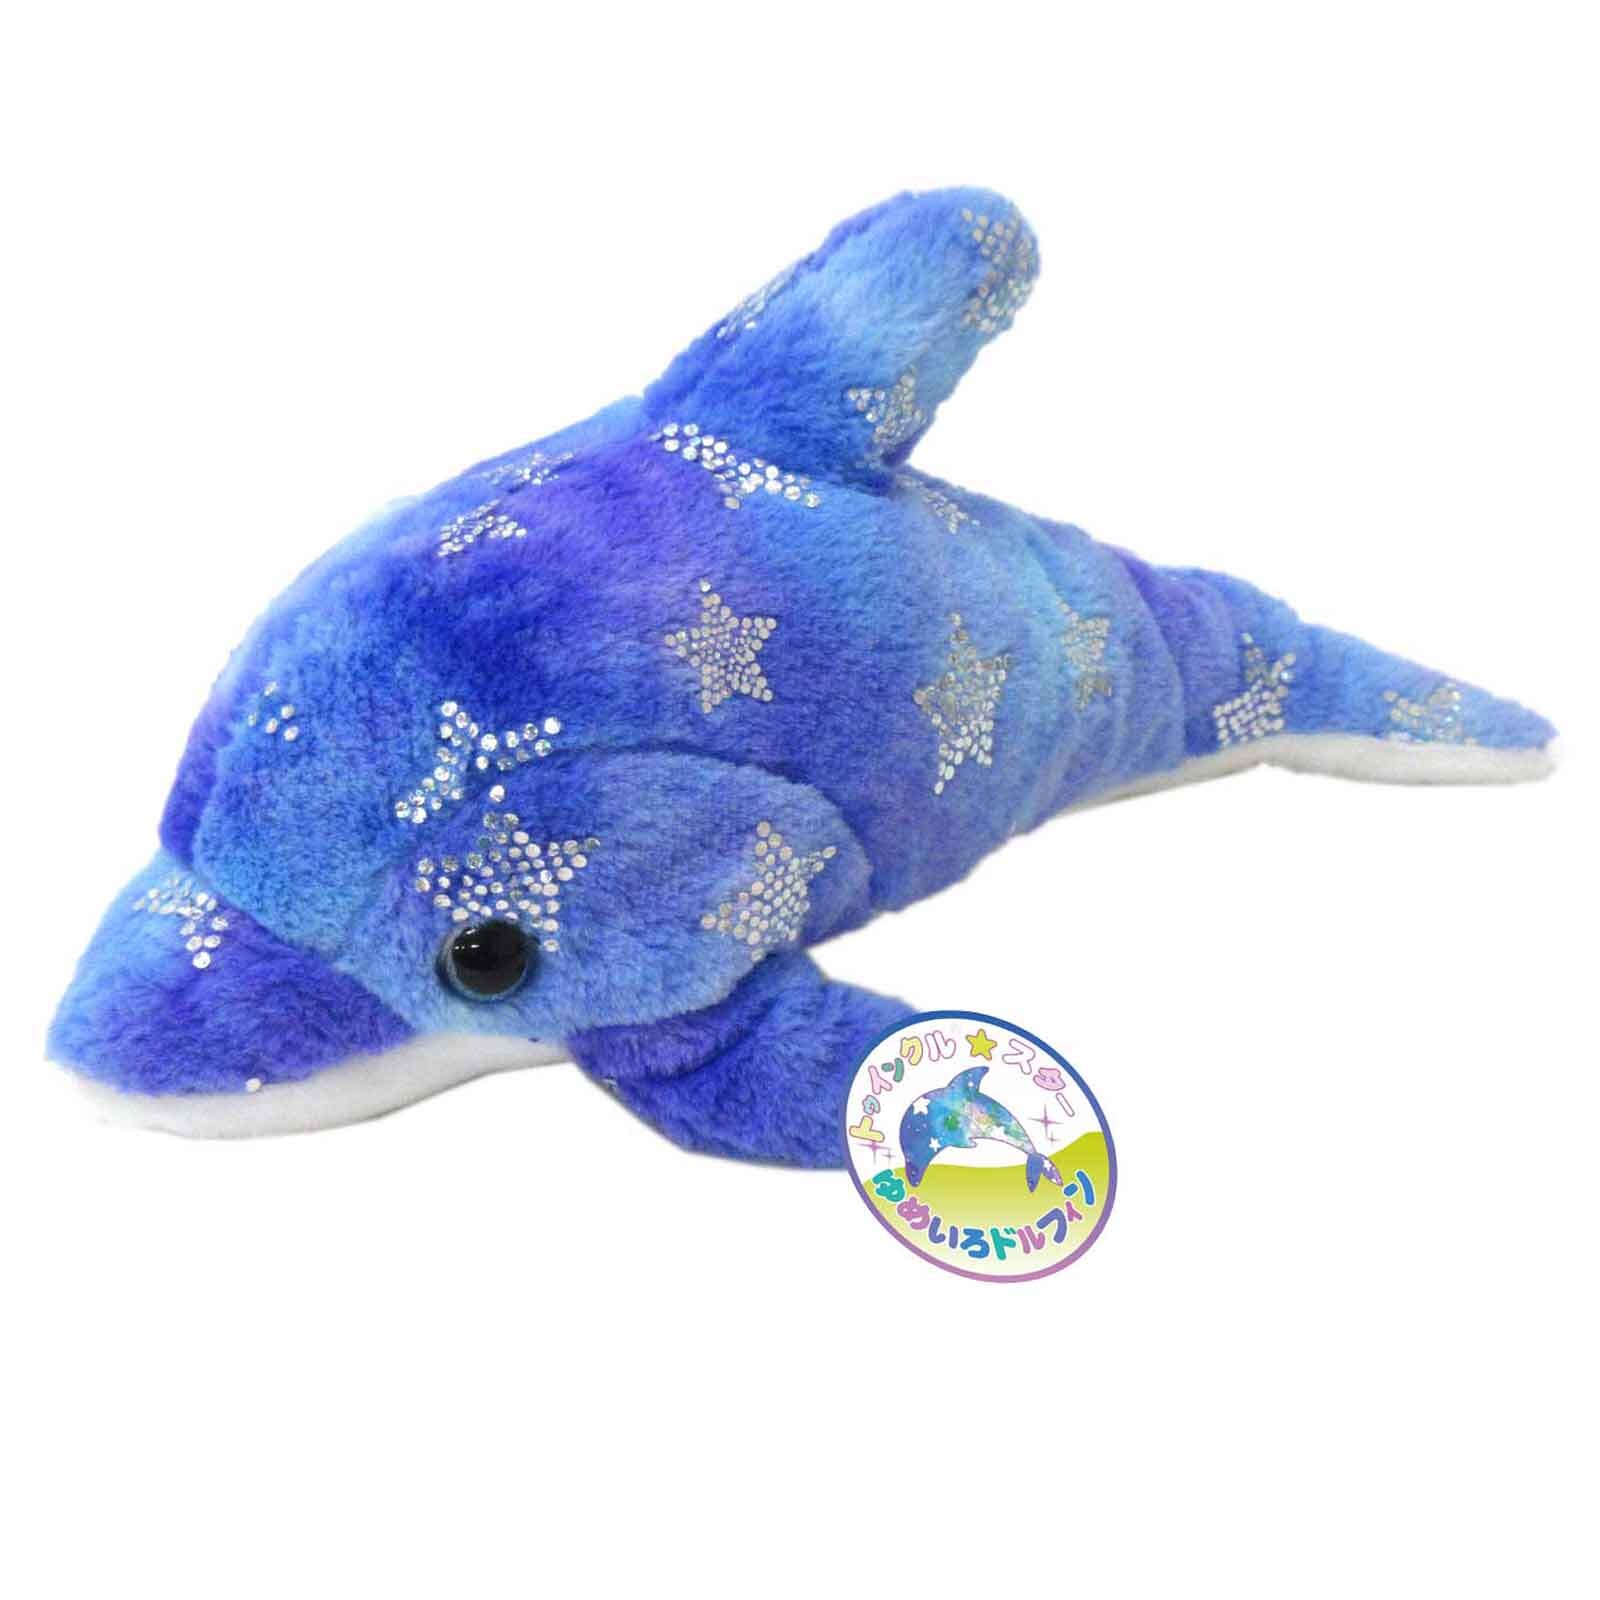 dolphin soft toy